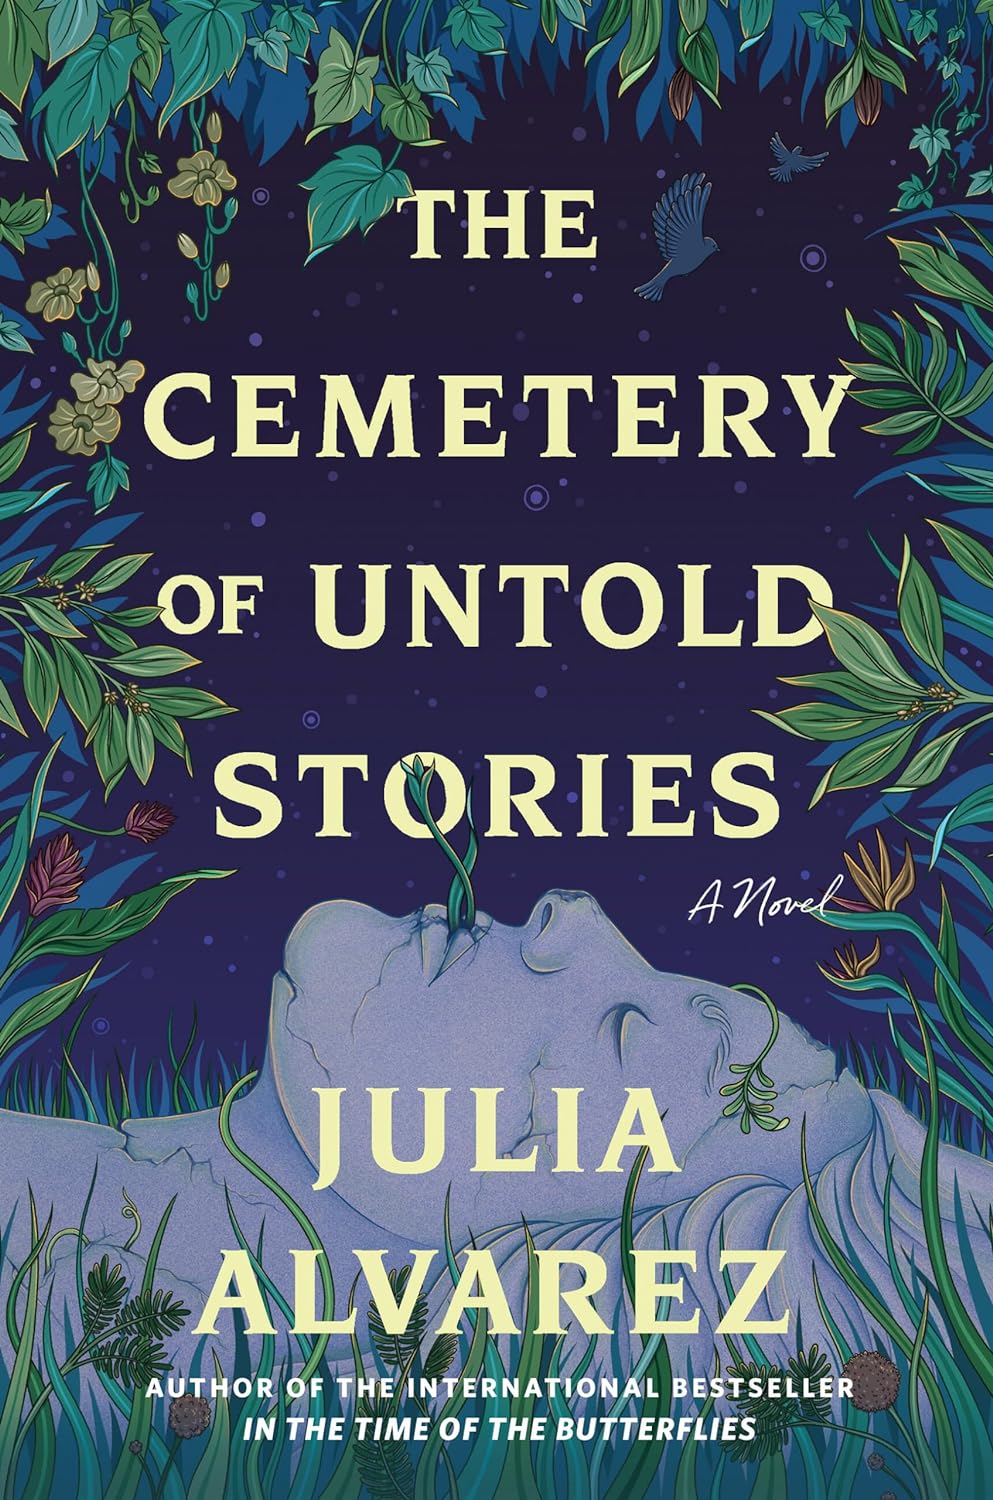 The Cemetery of Untold Stories: A Novel Hardcover